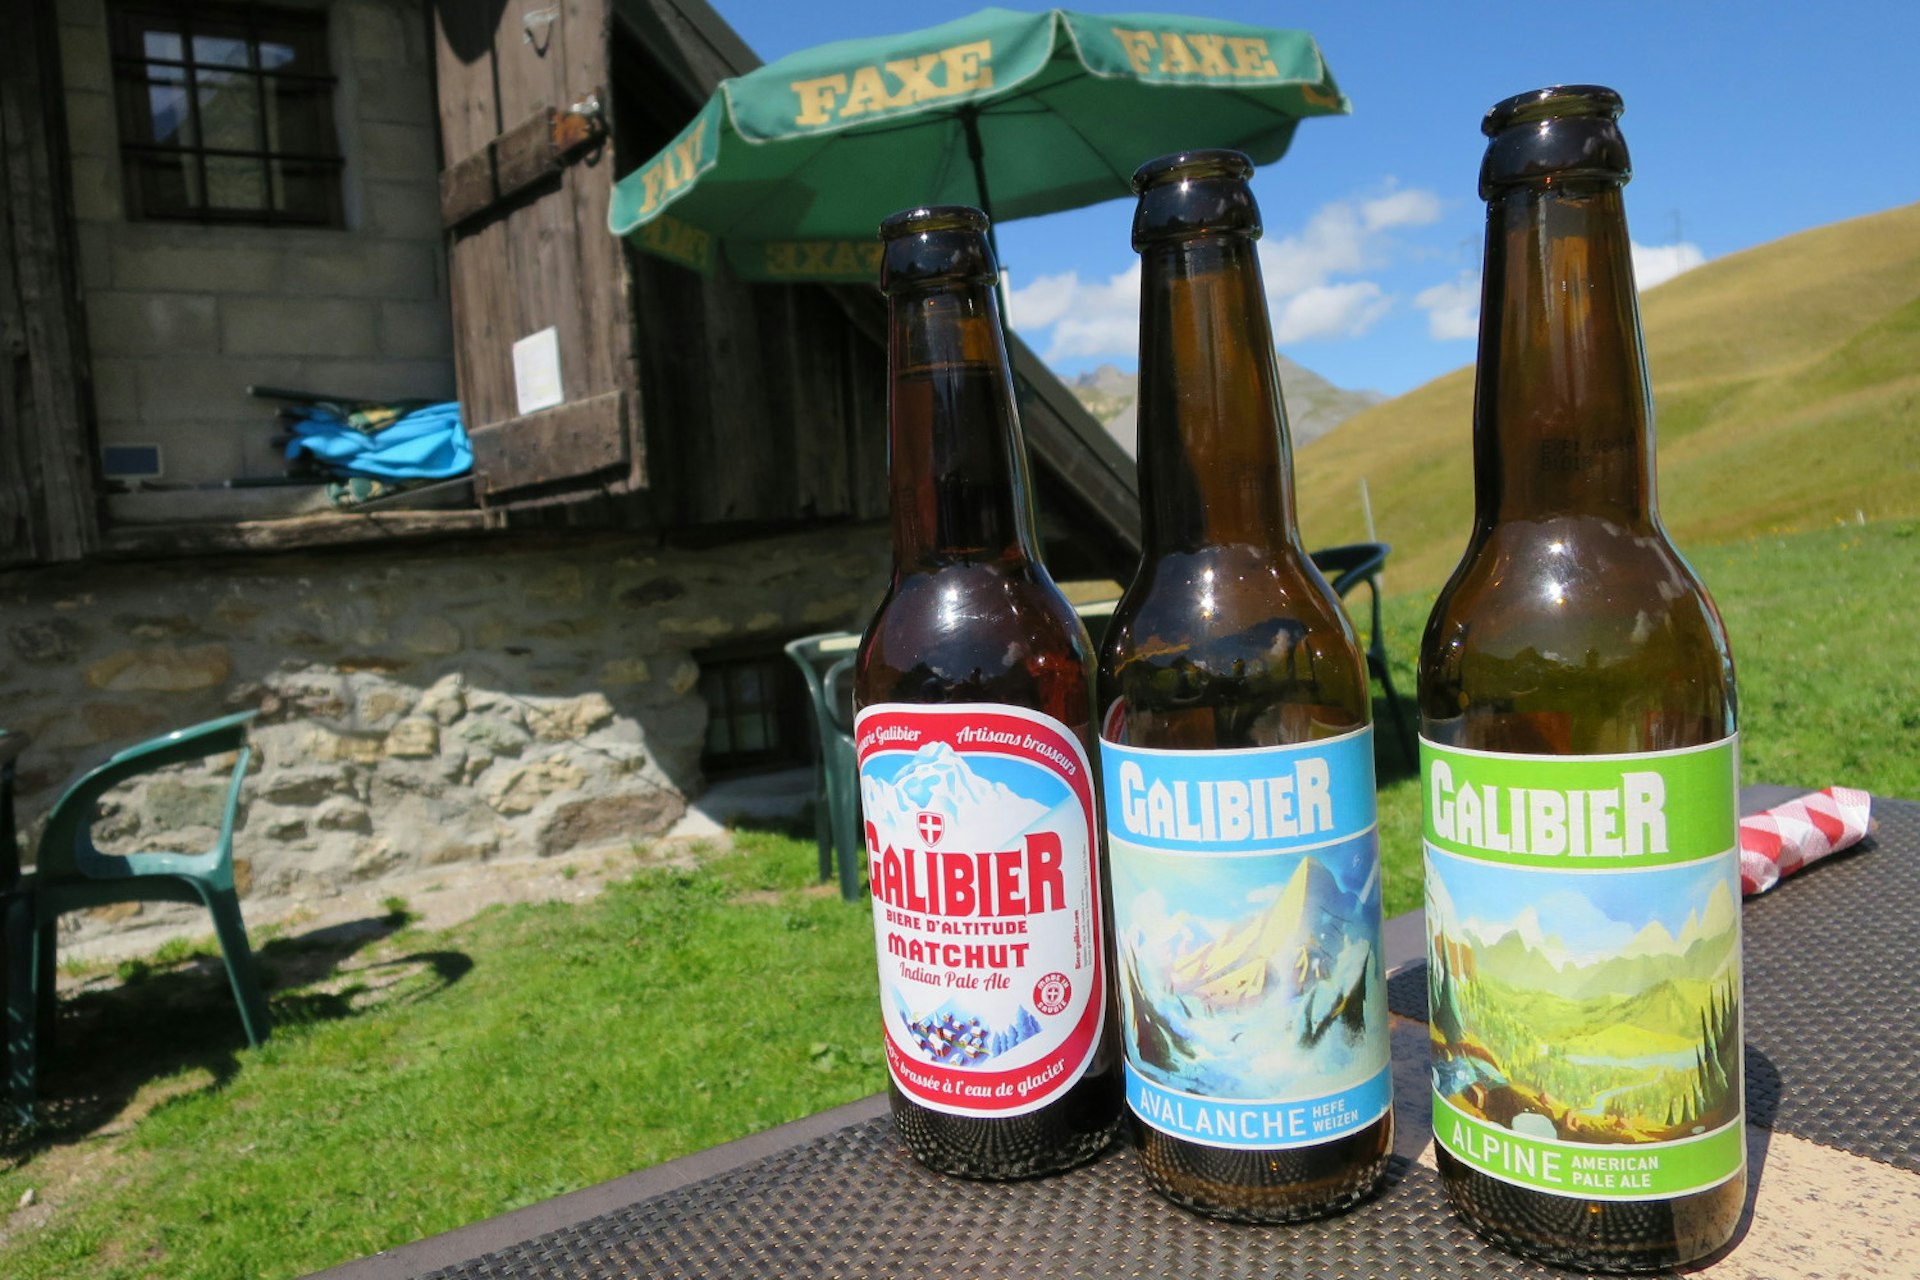 Sample all of Brasserie Galibier's beers at Auberge de Plan Lachat, an alpine hut in the shadow of the col. Image by Megan Eaves / Lonely Planet